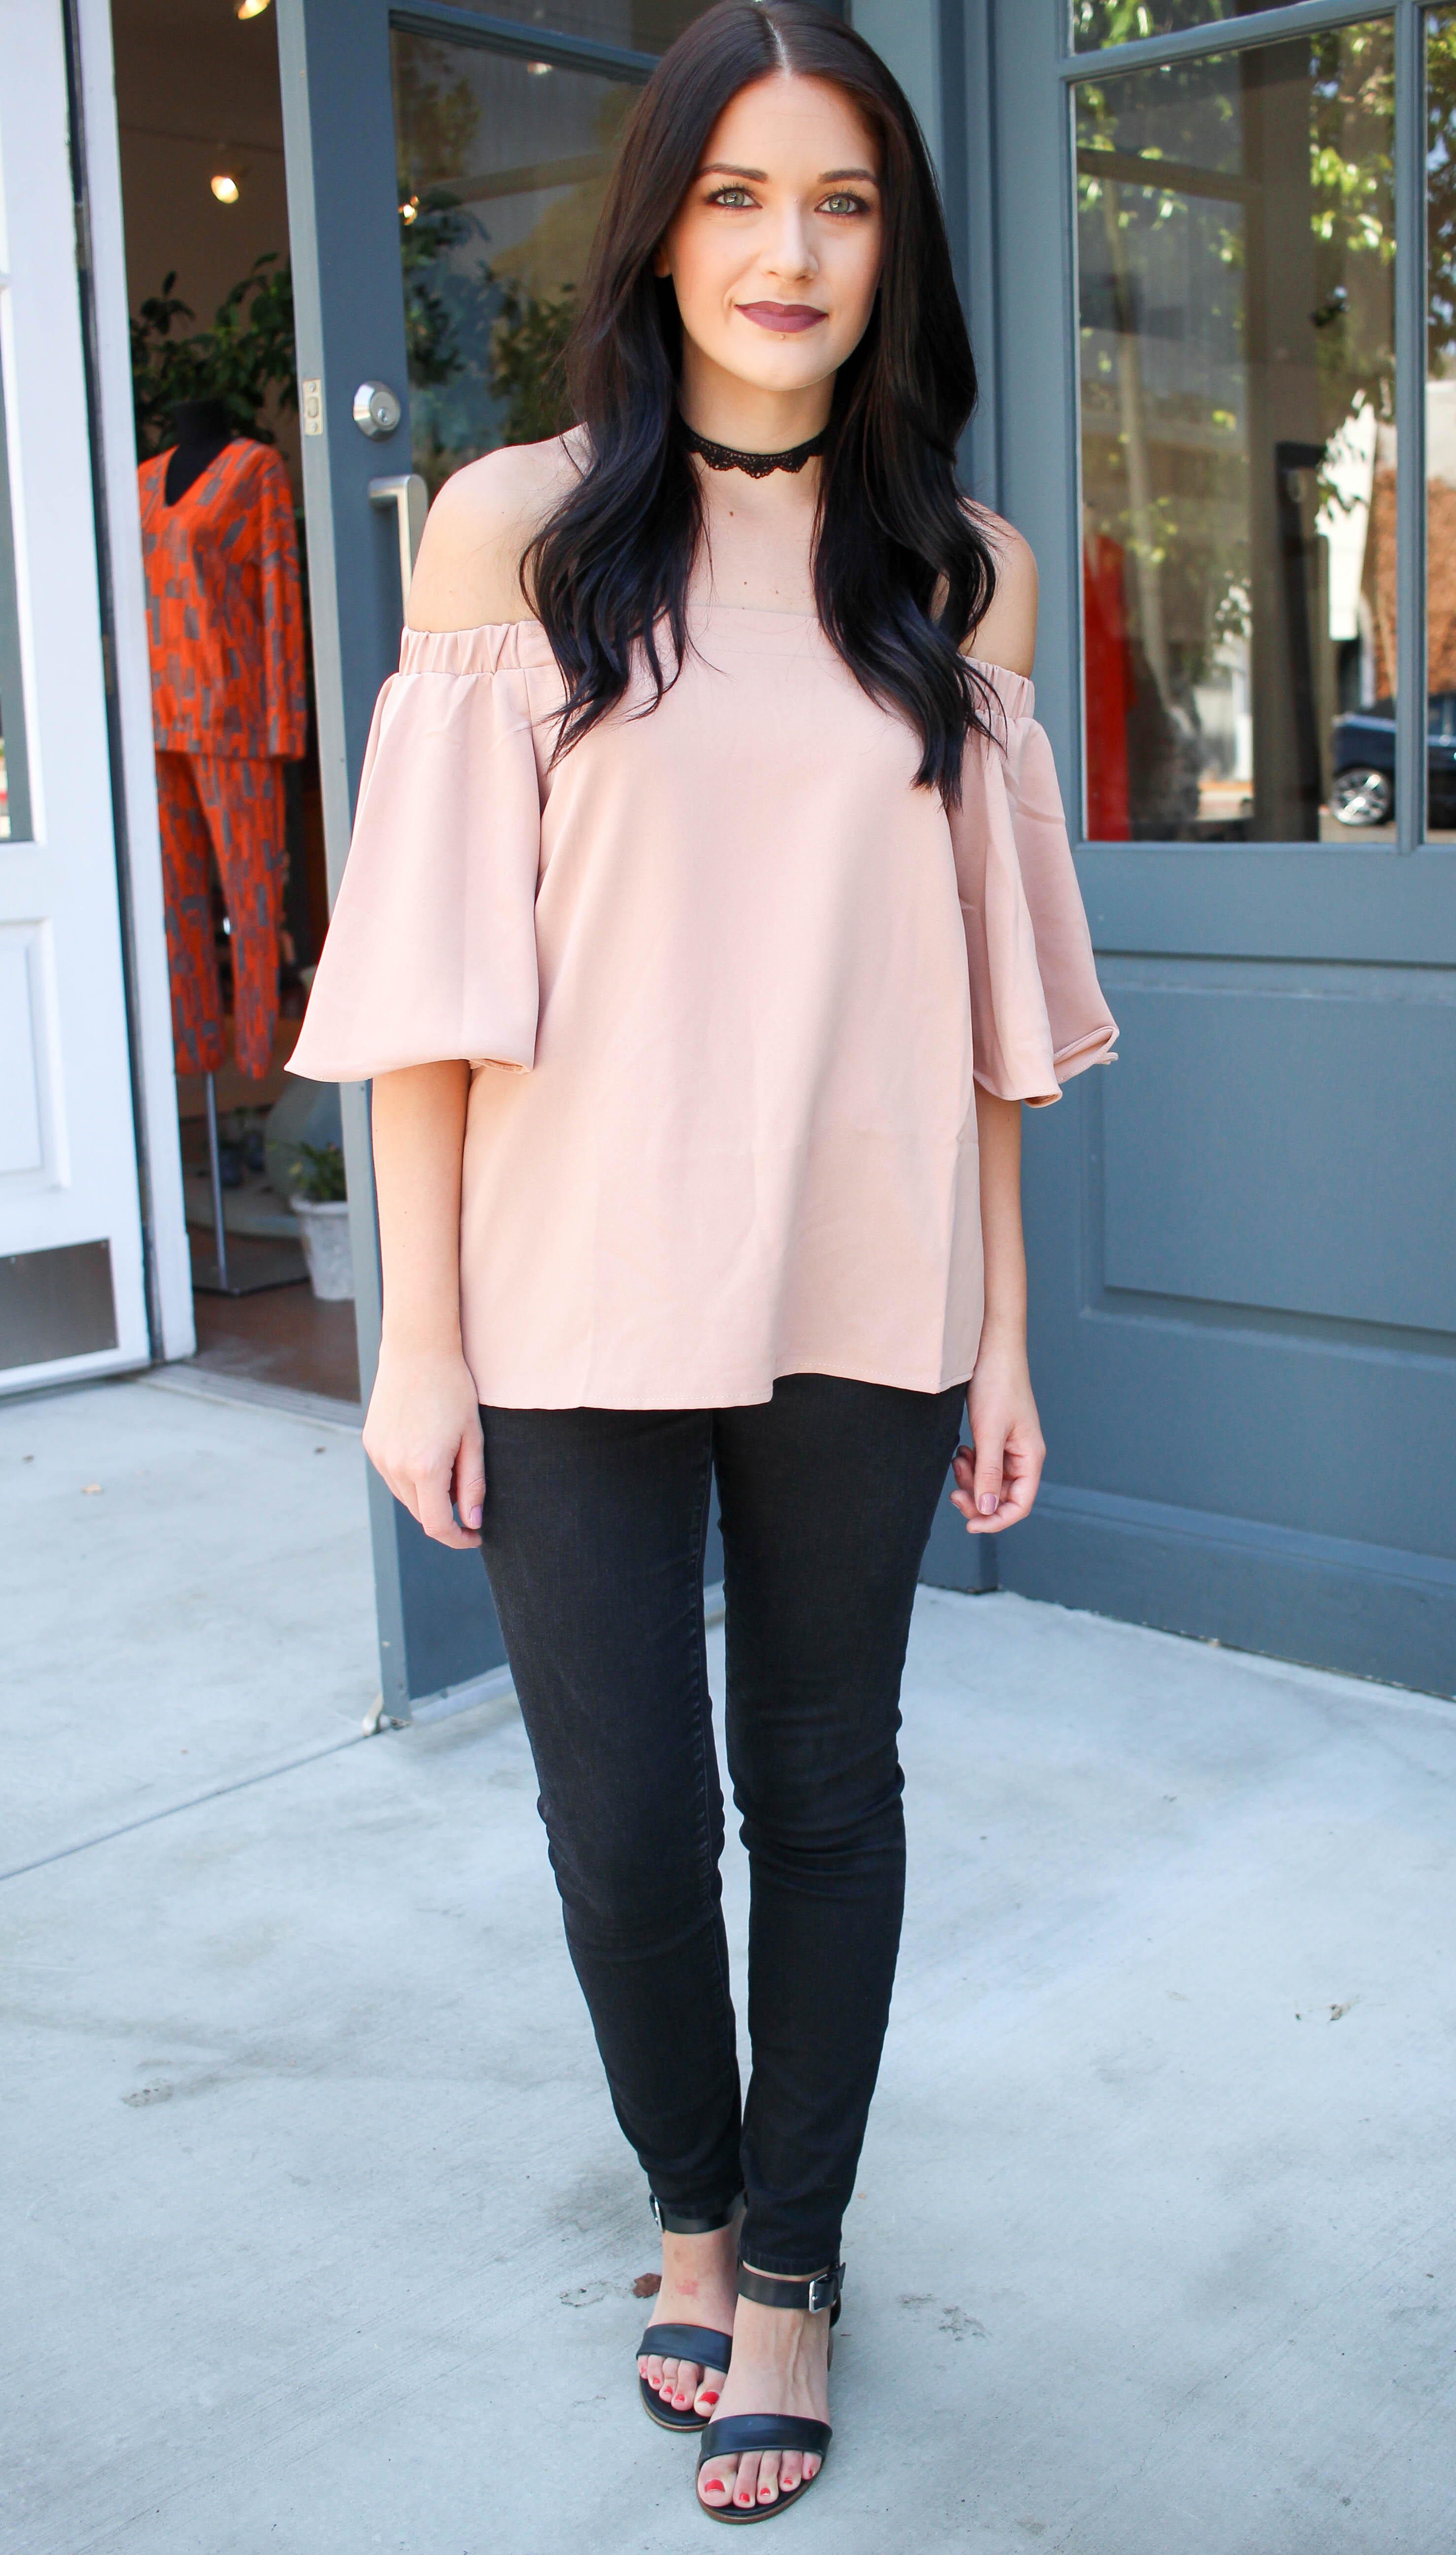 Flared Sleeves For Fall – Twinspiration